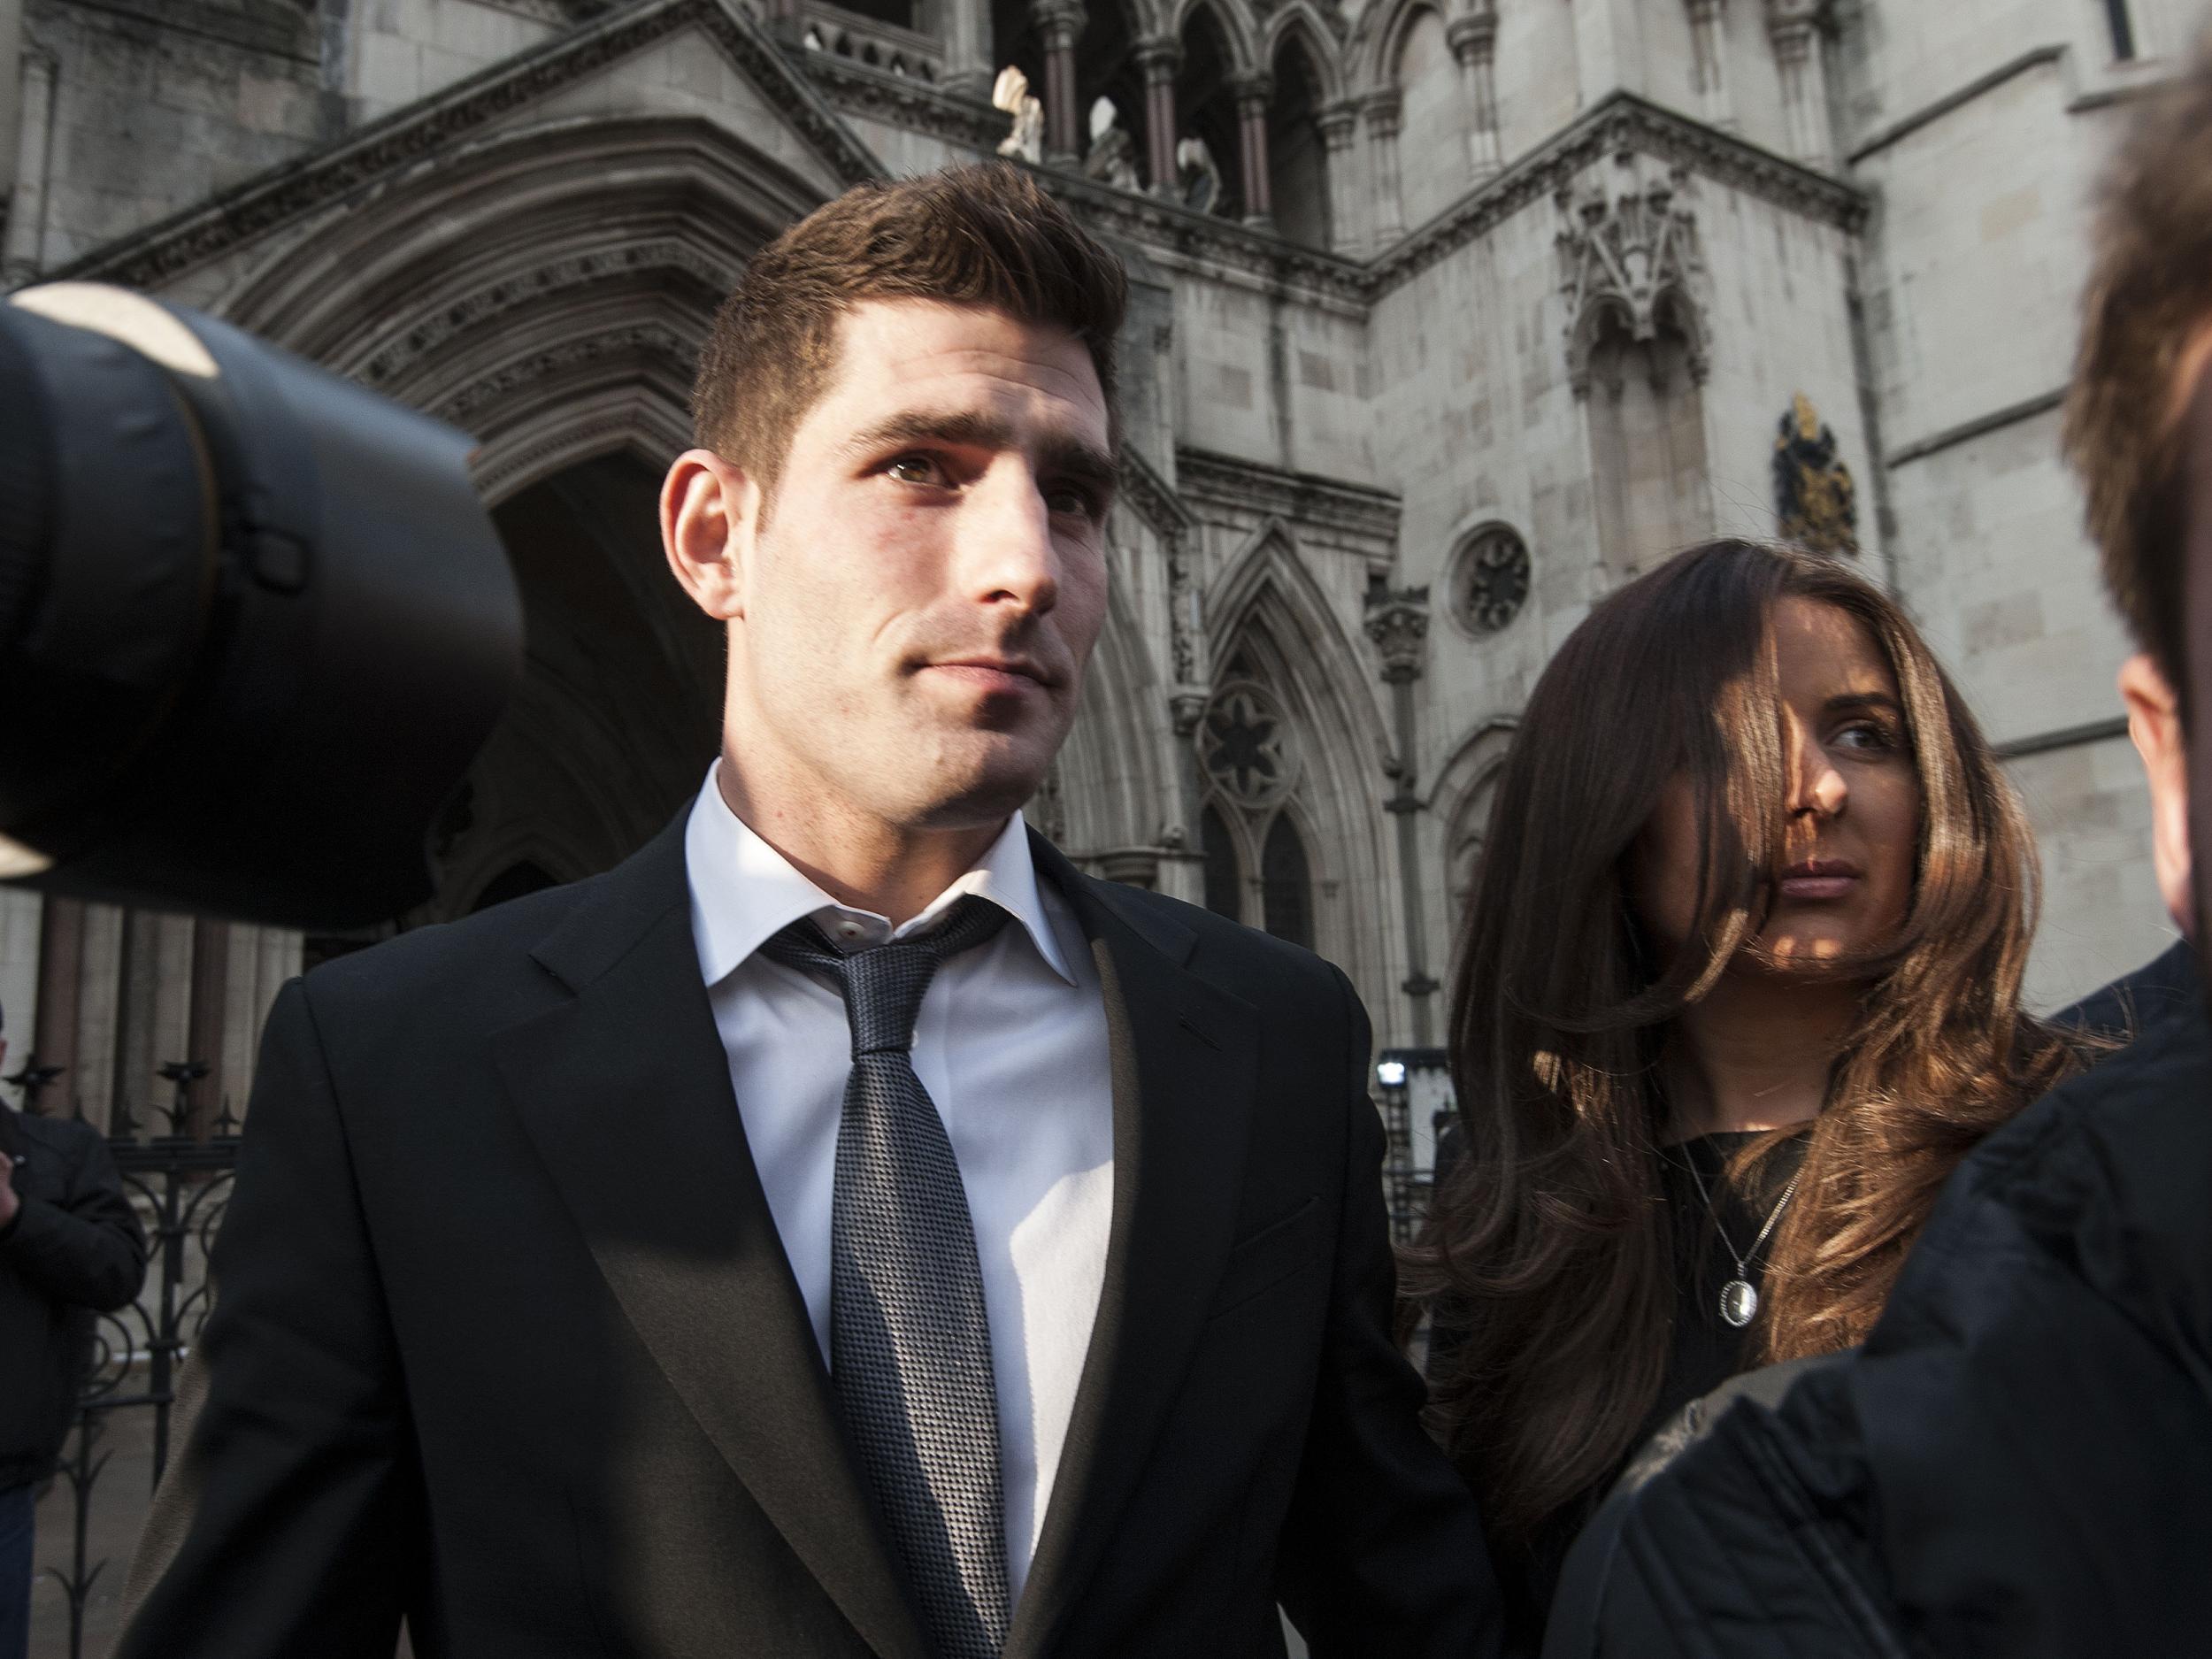 Ched Evans with his girlfriend Natasha Massey outside the Court of Appeal today